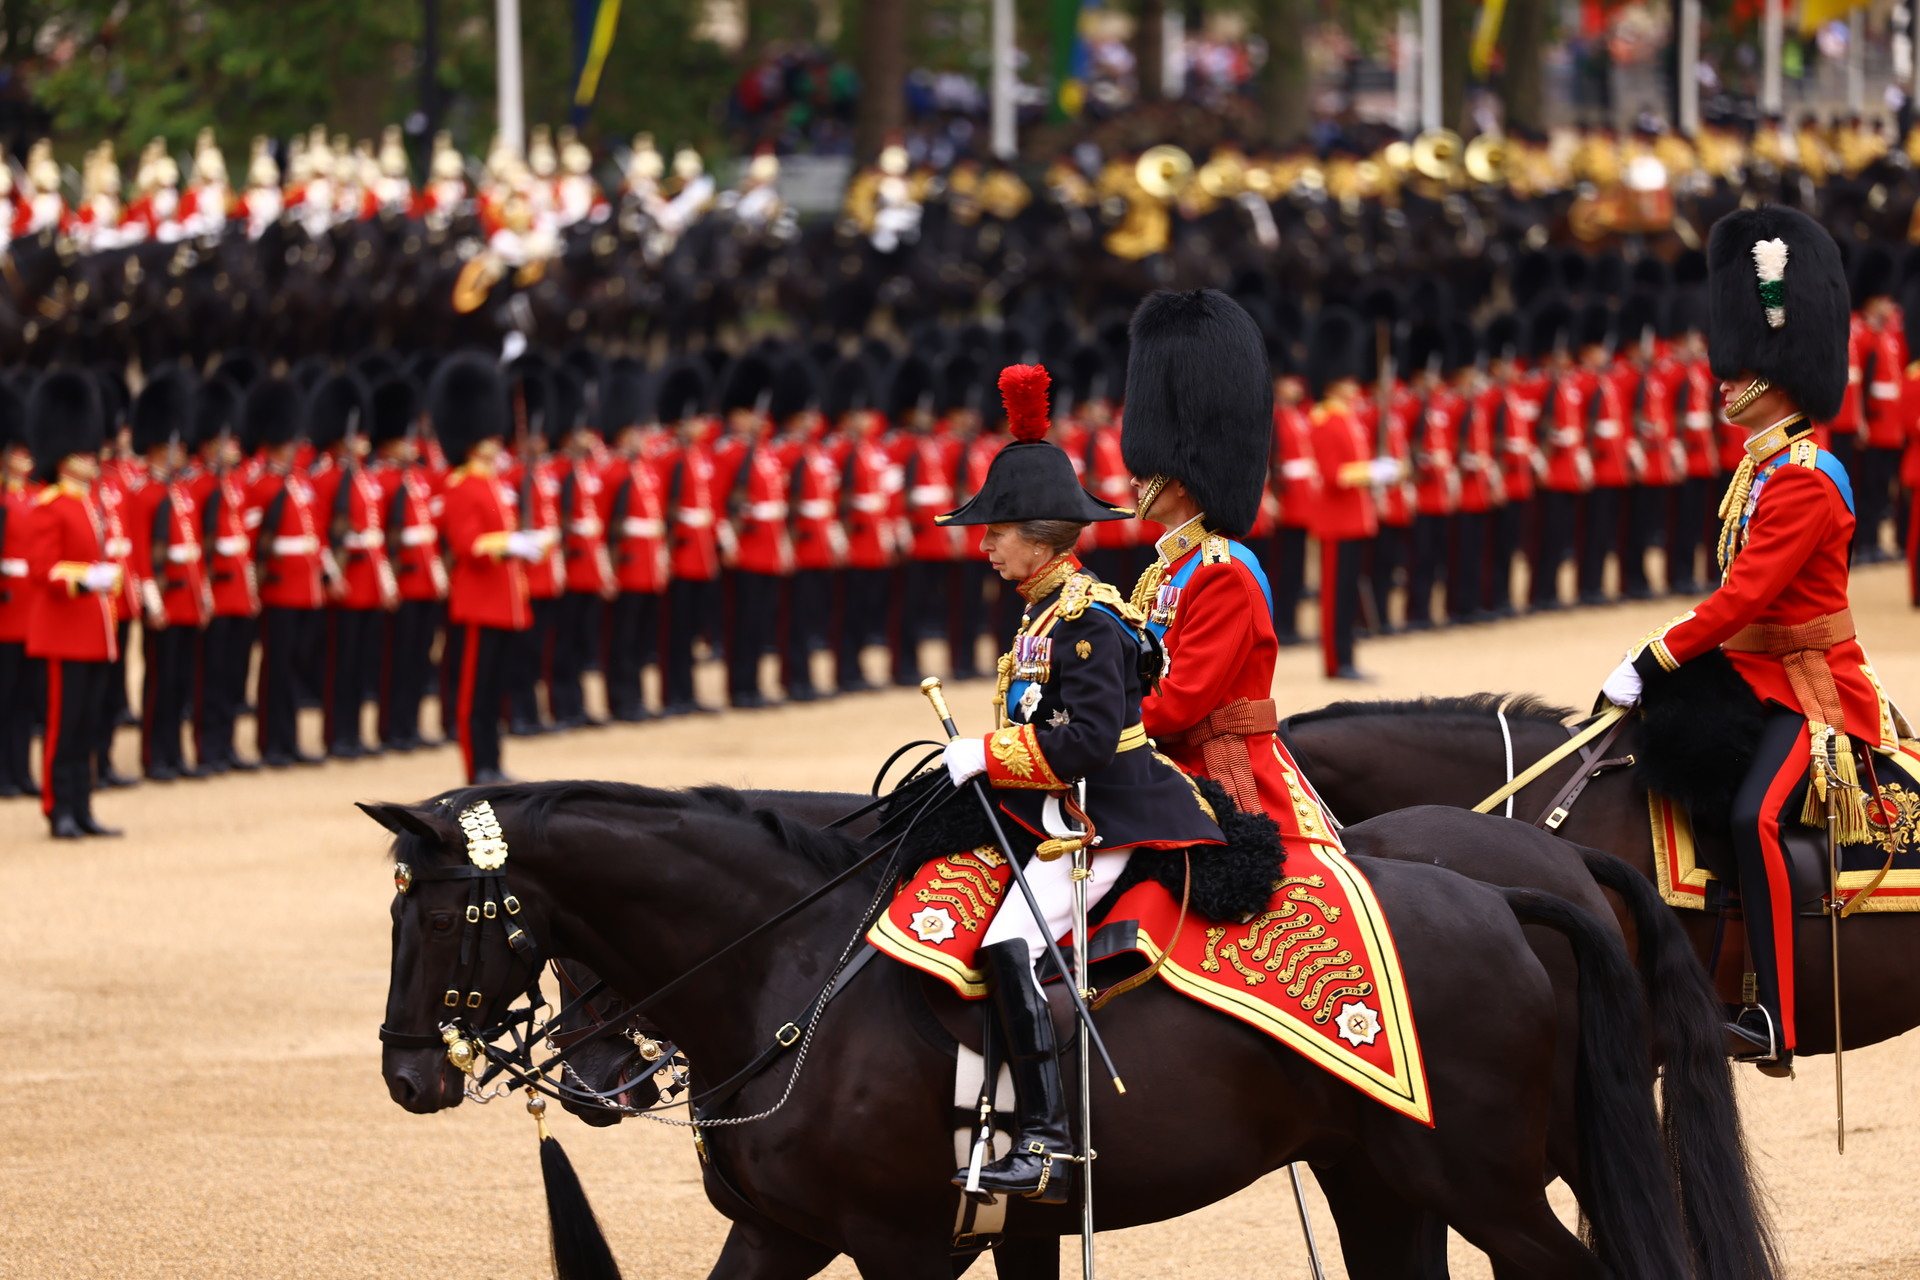 Pictured: HRH The Prince of Wales, The Duke of Edinburgh, and HRH Princess Anne on horseback at Horseguards.